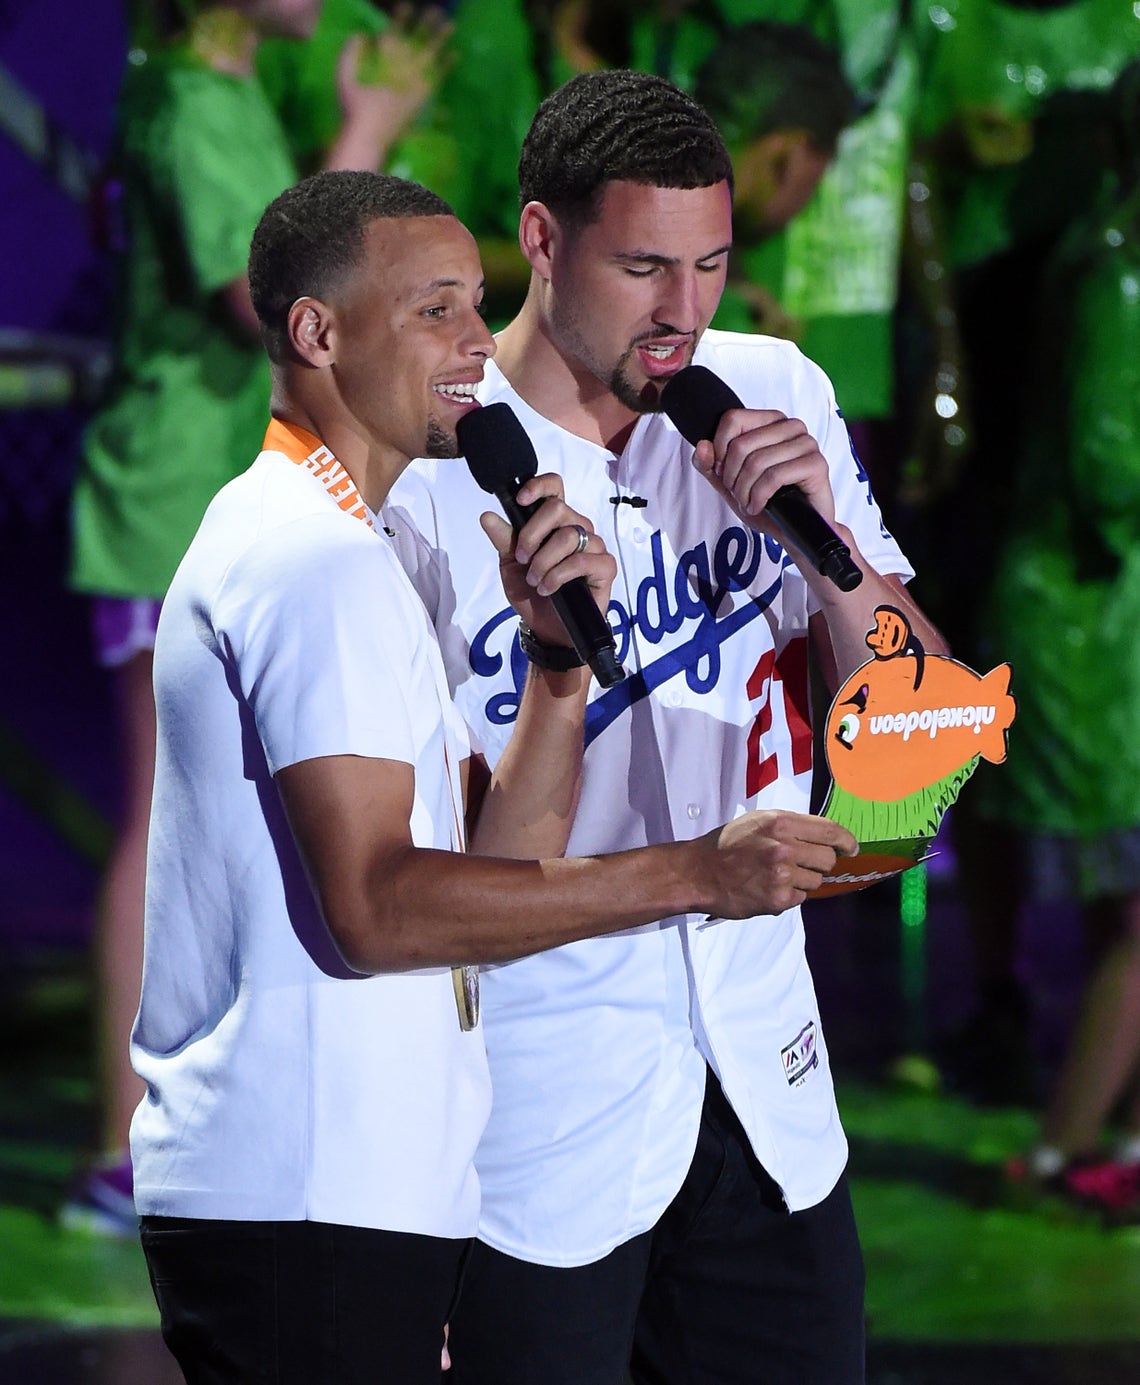 The Untold Truth Of Steph Curry's Kids